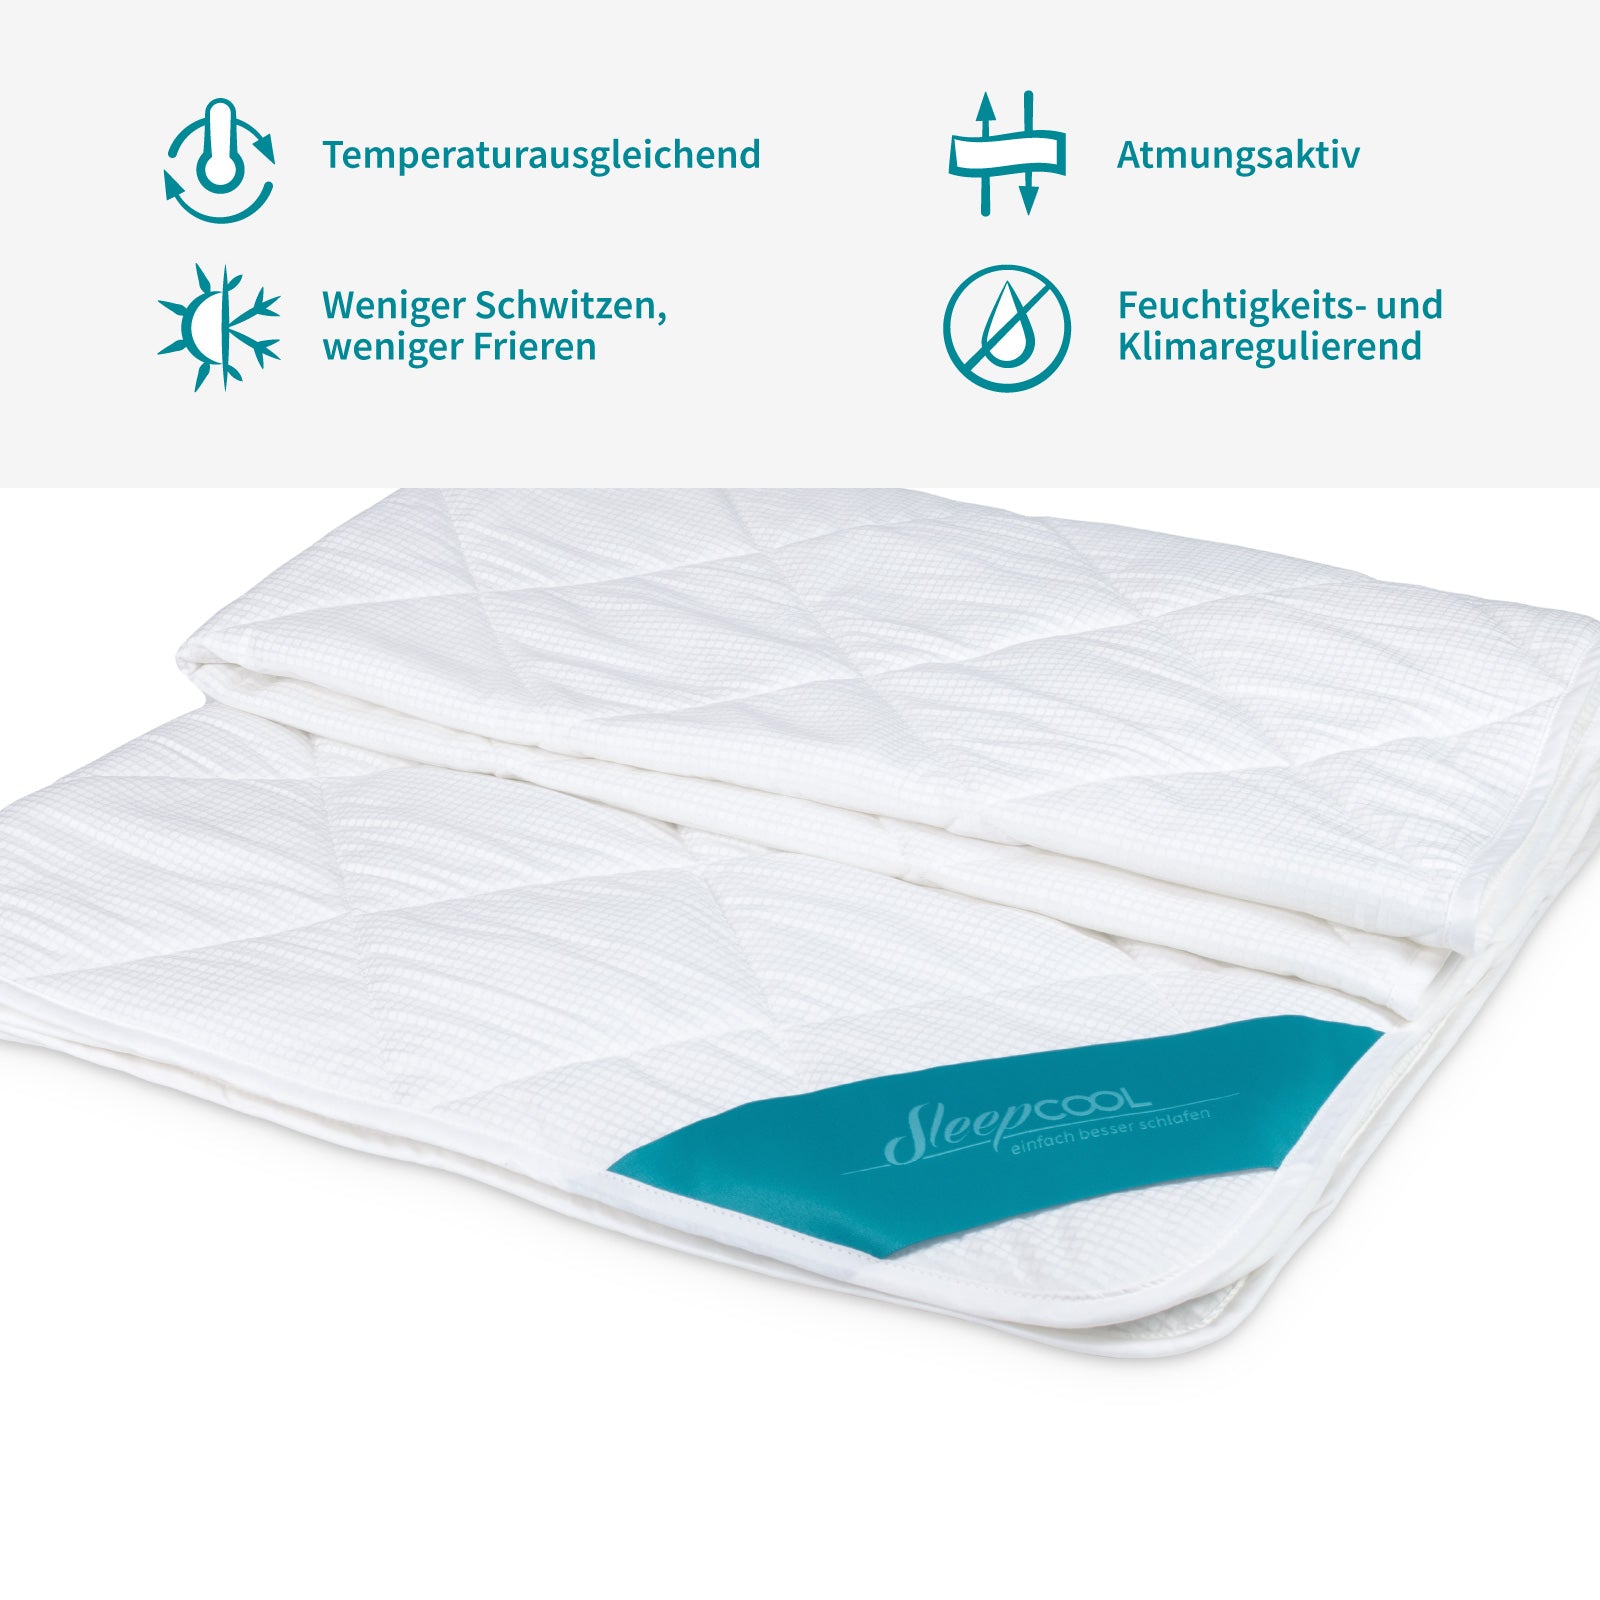 Temperature-regulating Duvet (400g-490g) COOL.EMOTIONS - lightweight, breathable Quilt - not too warm, not too cold